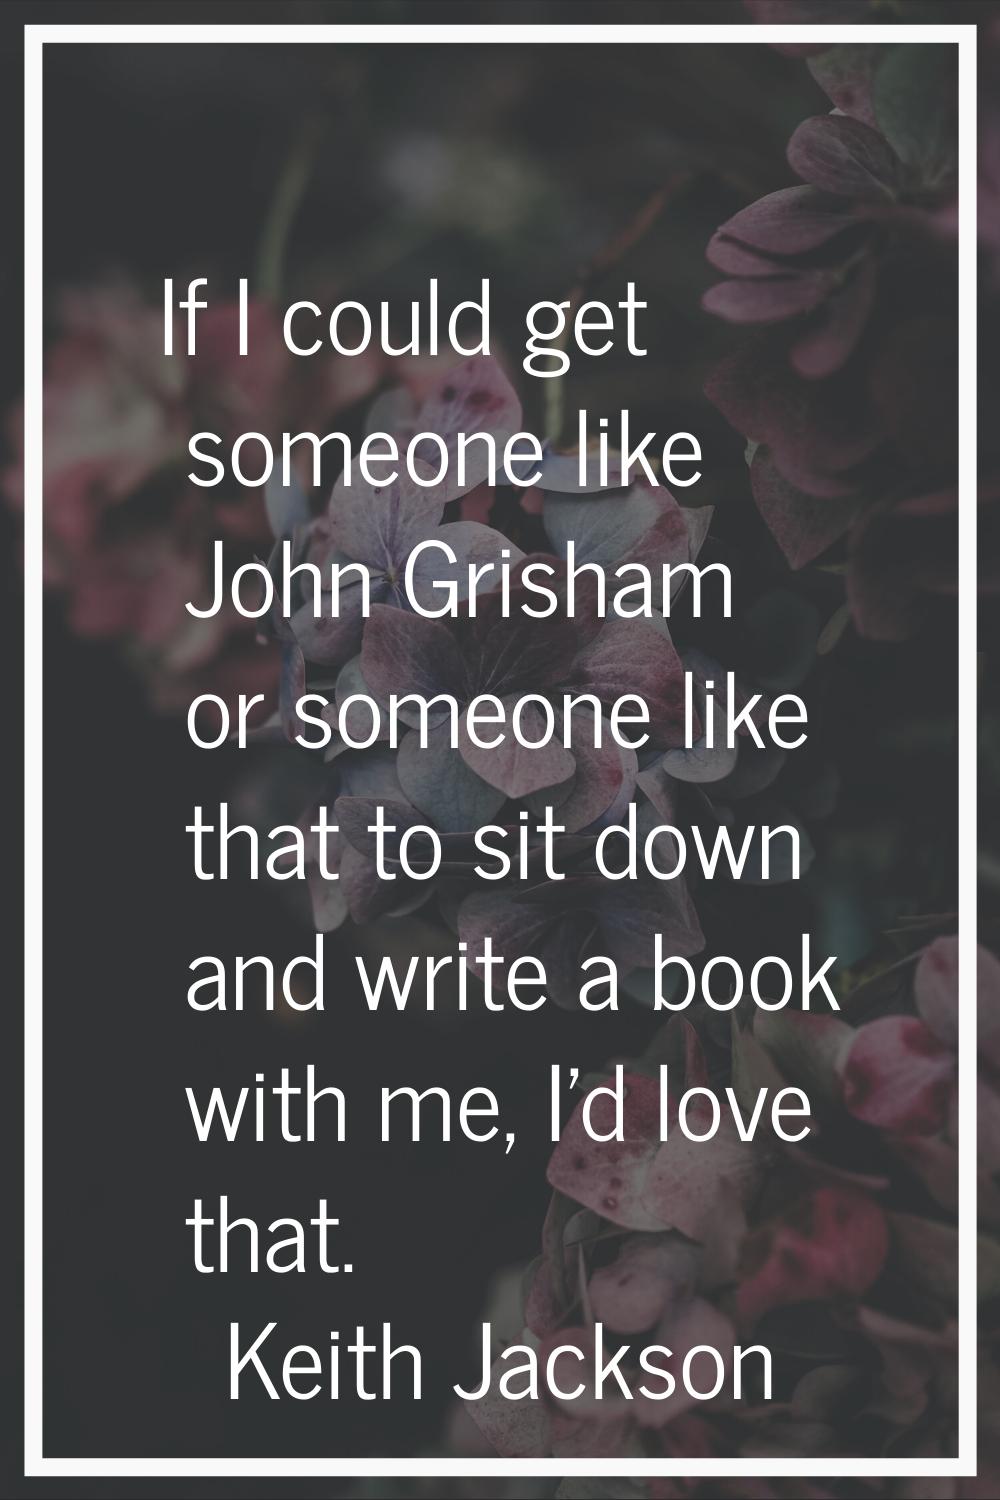 If I could get someone like John Grisham or someone like that to sit down and write a book with me,